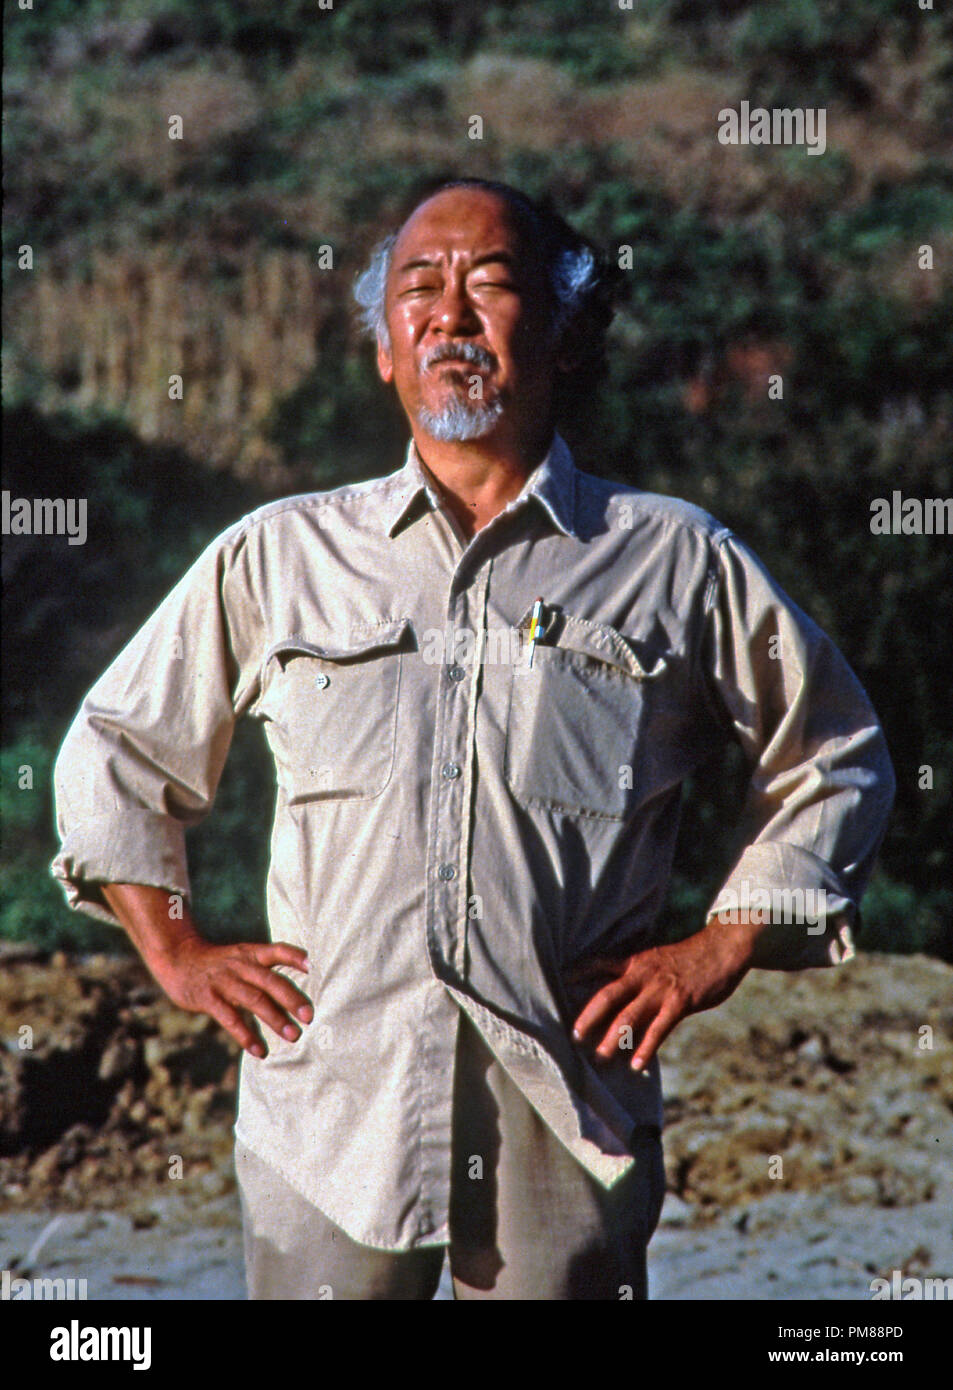 Studio Publicity Still from 'The Karate Kid' Pat Morita  © 1984 Columbia  All Rights Reserved   File Reference # 31706086THA  For Editorial Use Only Stock Photo